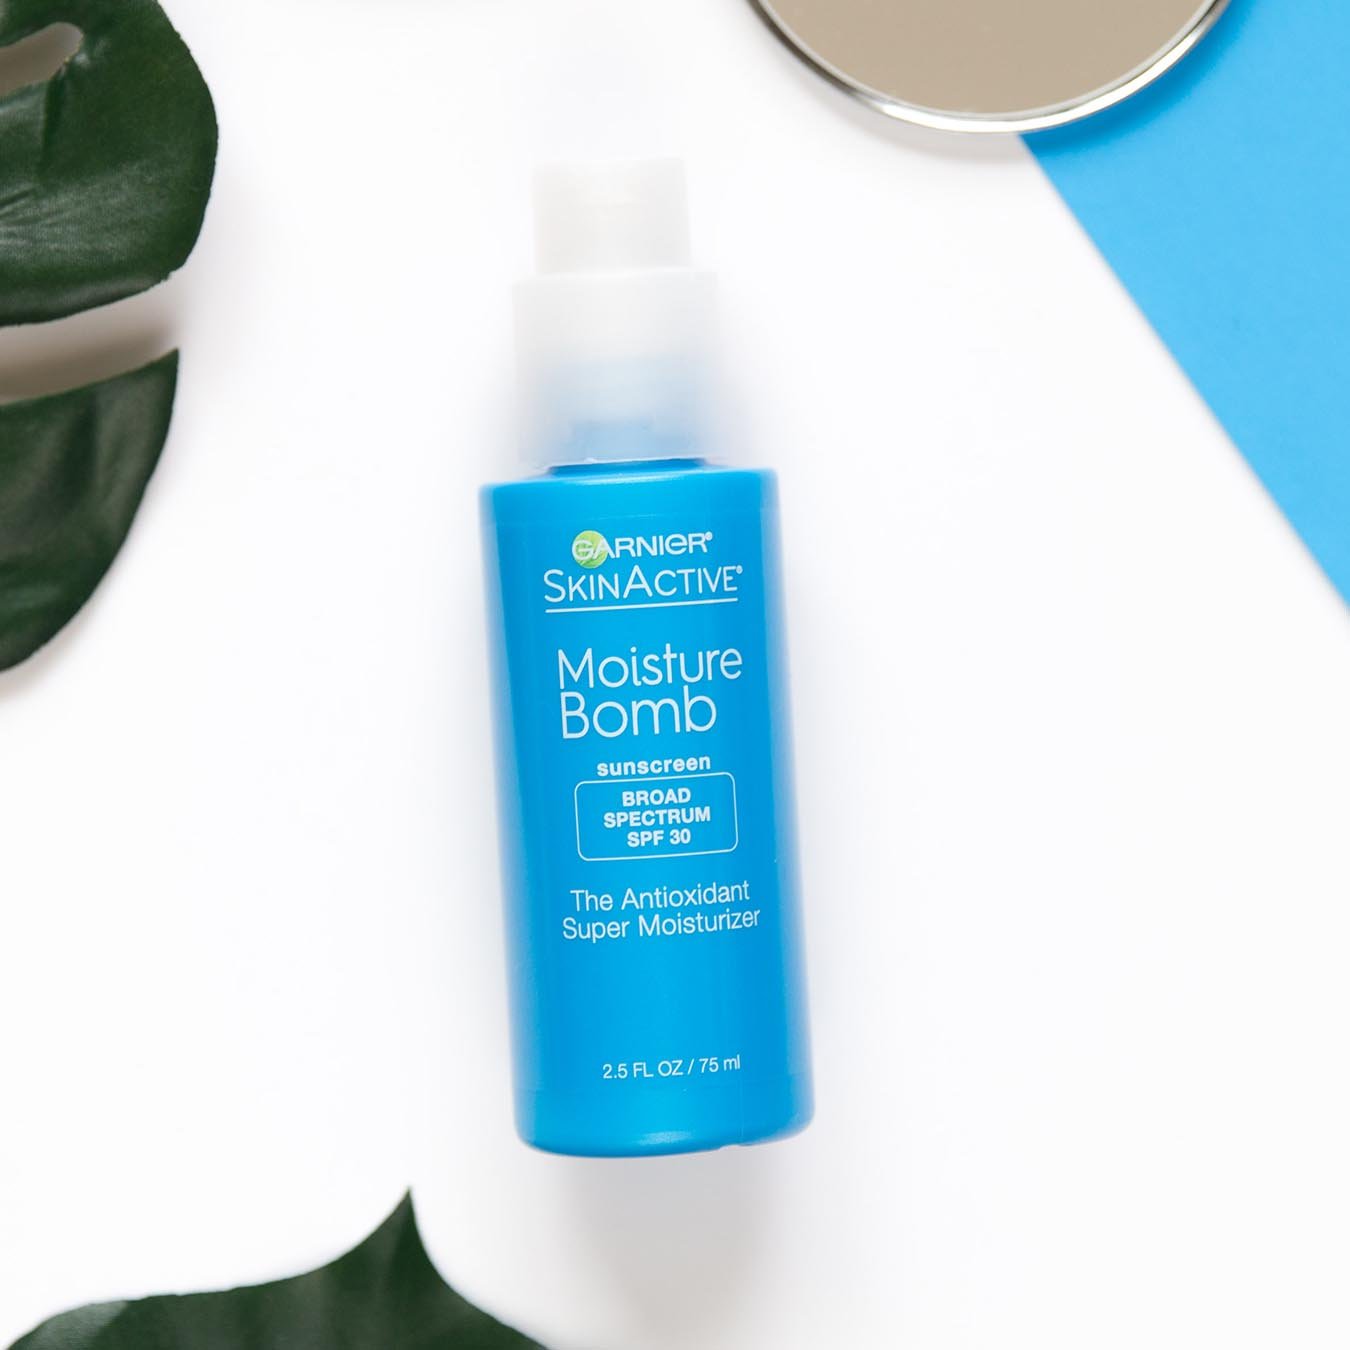 Garnier SkinActive Moisture Bomb Sunscreen Broad Spectrum SPF 30 The Antioxidant Super Moisturizer on a white background next to palm fronds and a mirror partially sitting on a blue piece of paper.